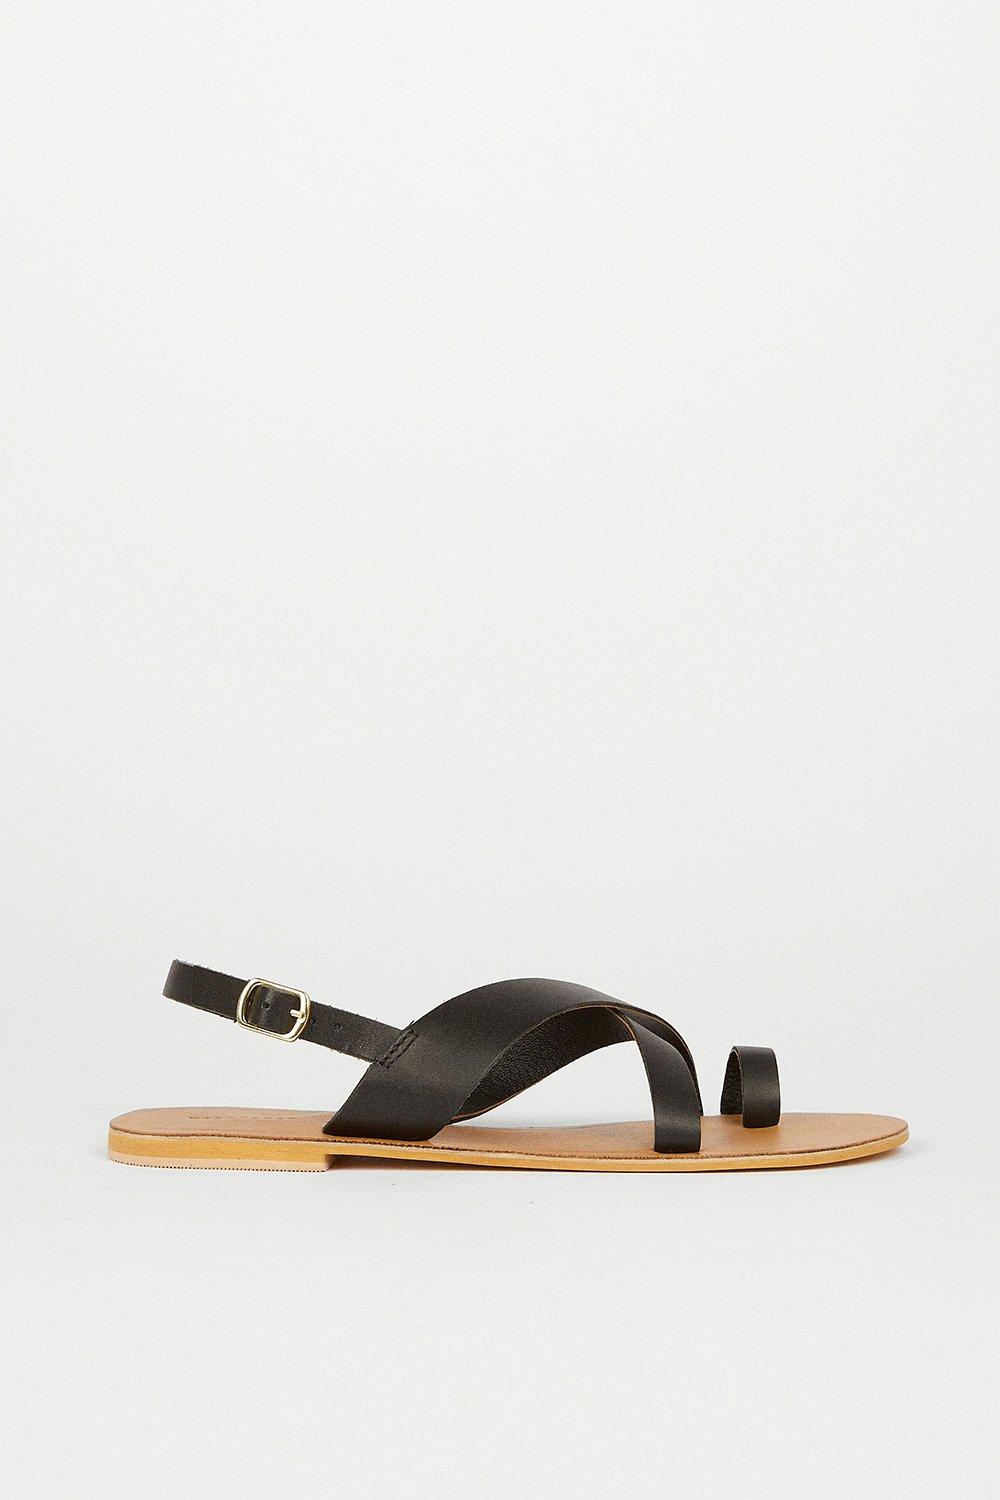 Sandals | Real Leather Strappy Sandal | Warehouse